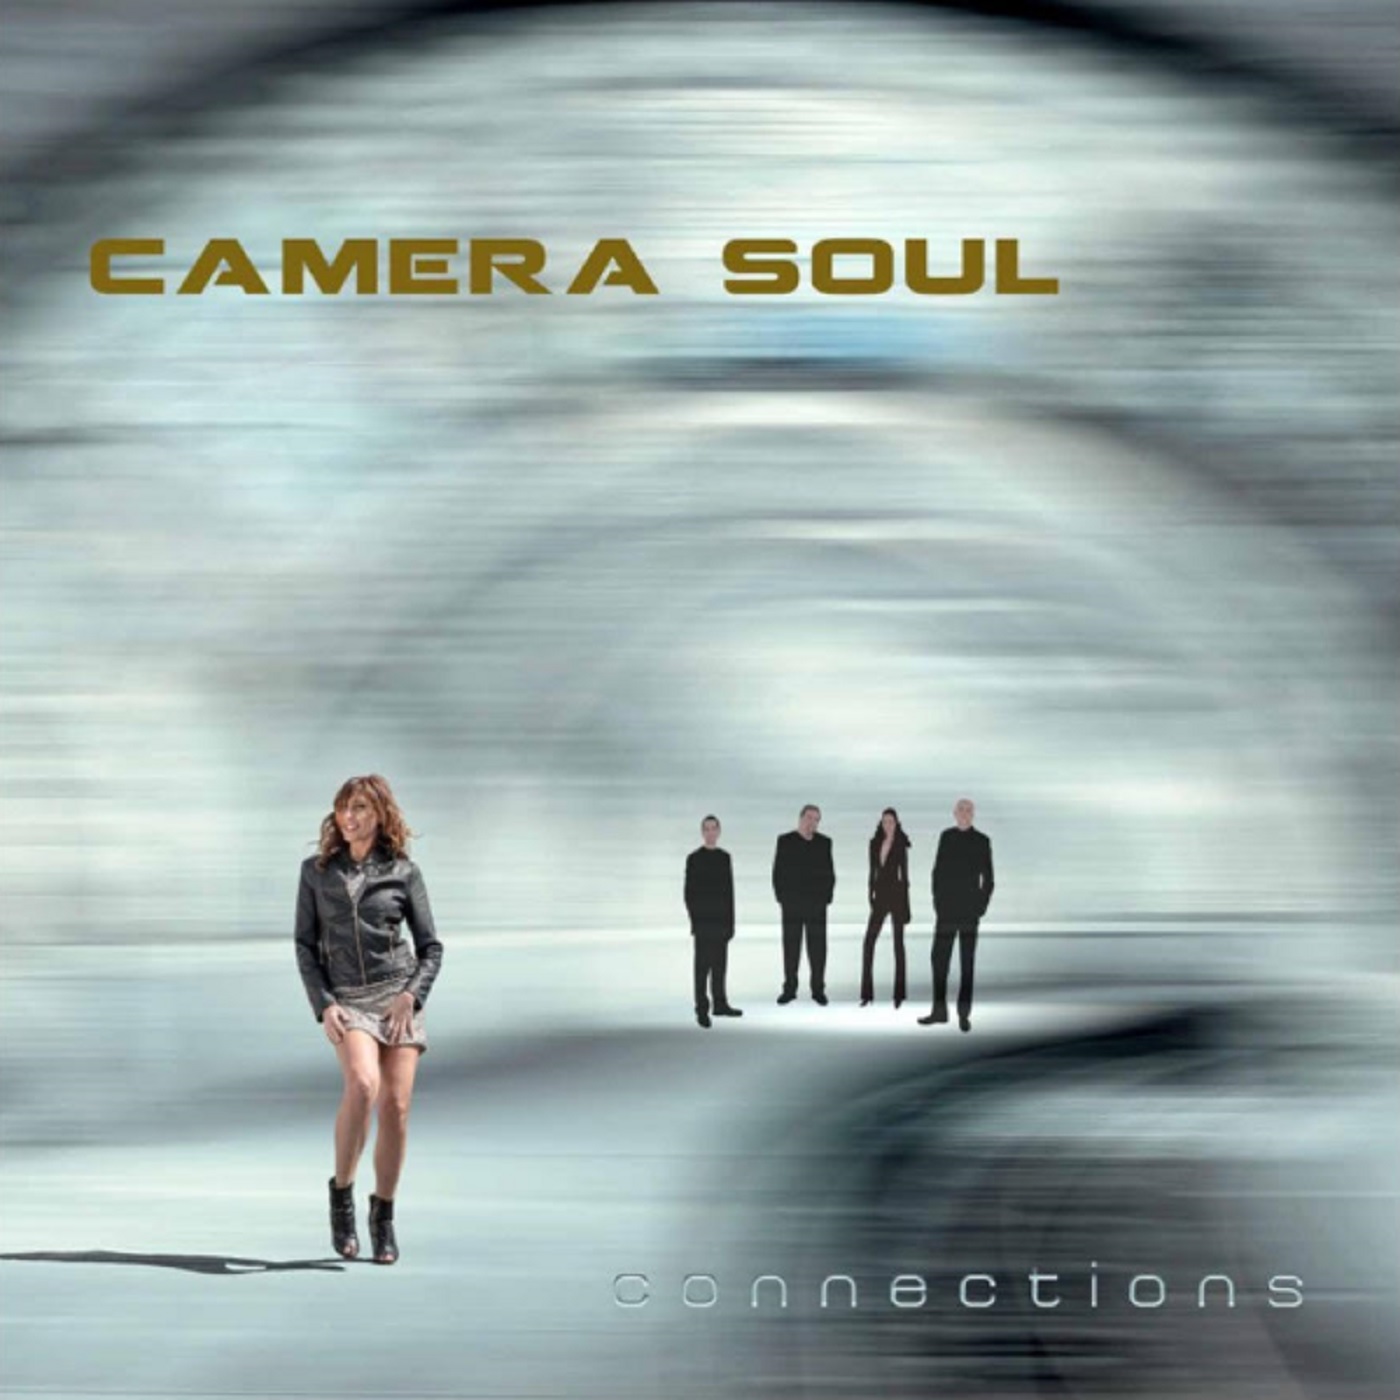 2017 flac. Camera Soul - the Happiest Day.